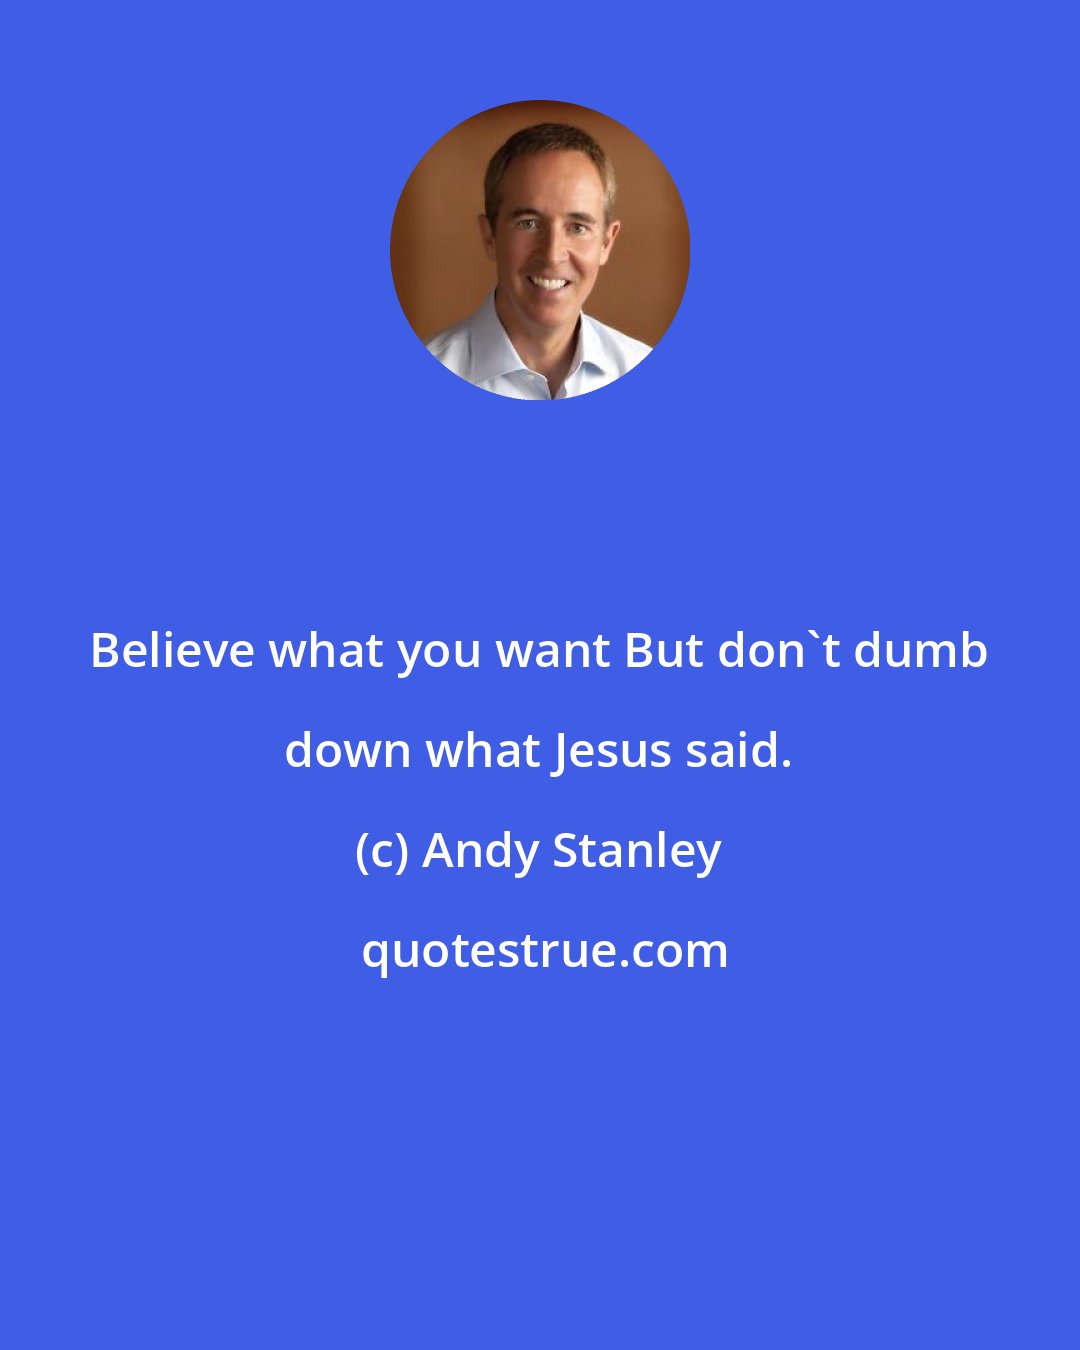 Andy Stanley: Believe what you want But don't dumb down what Jesus said.